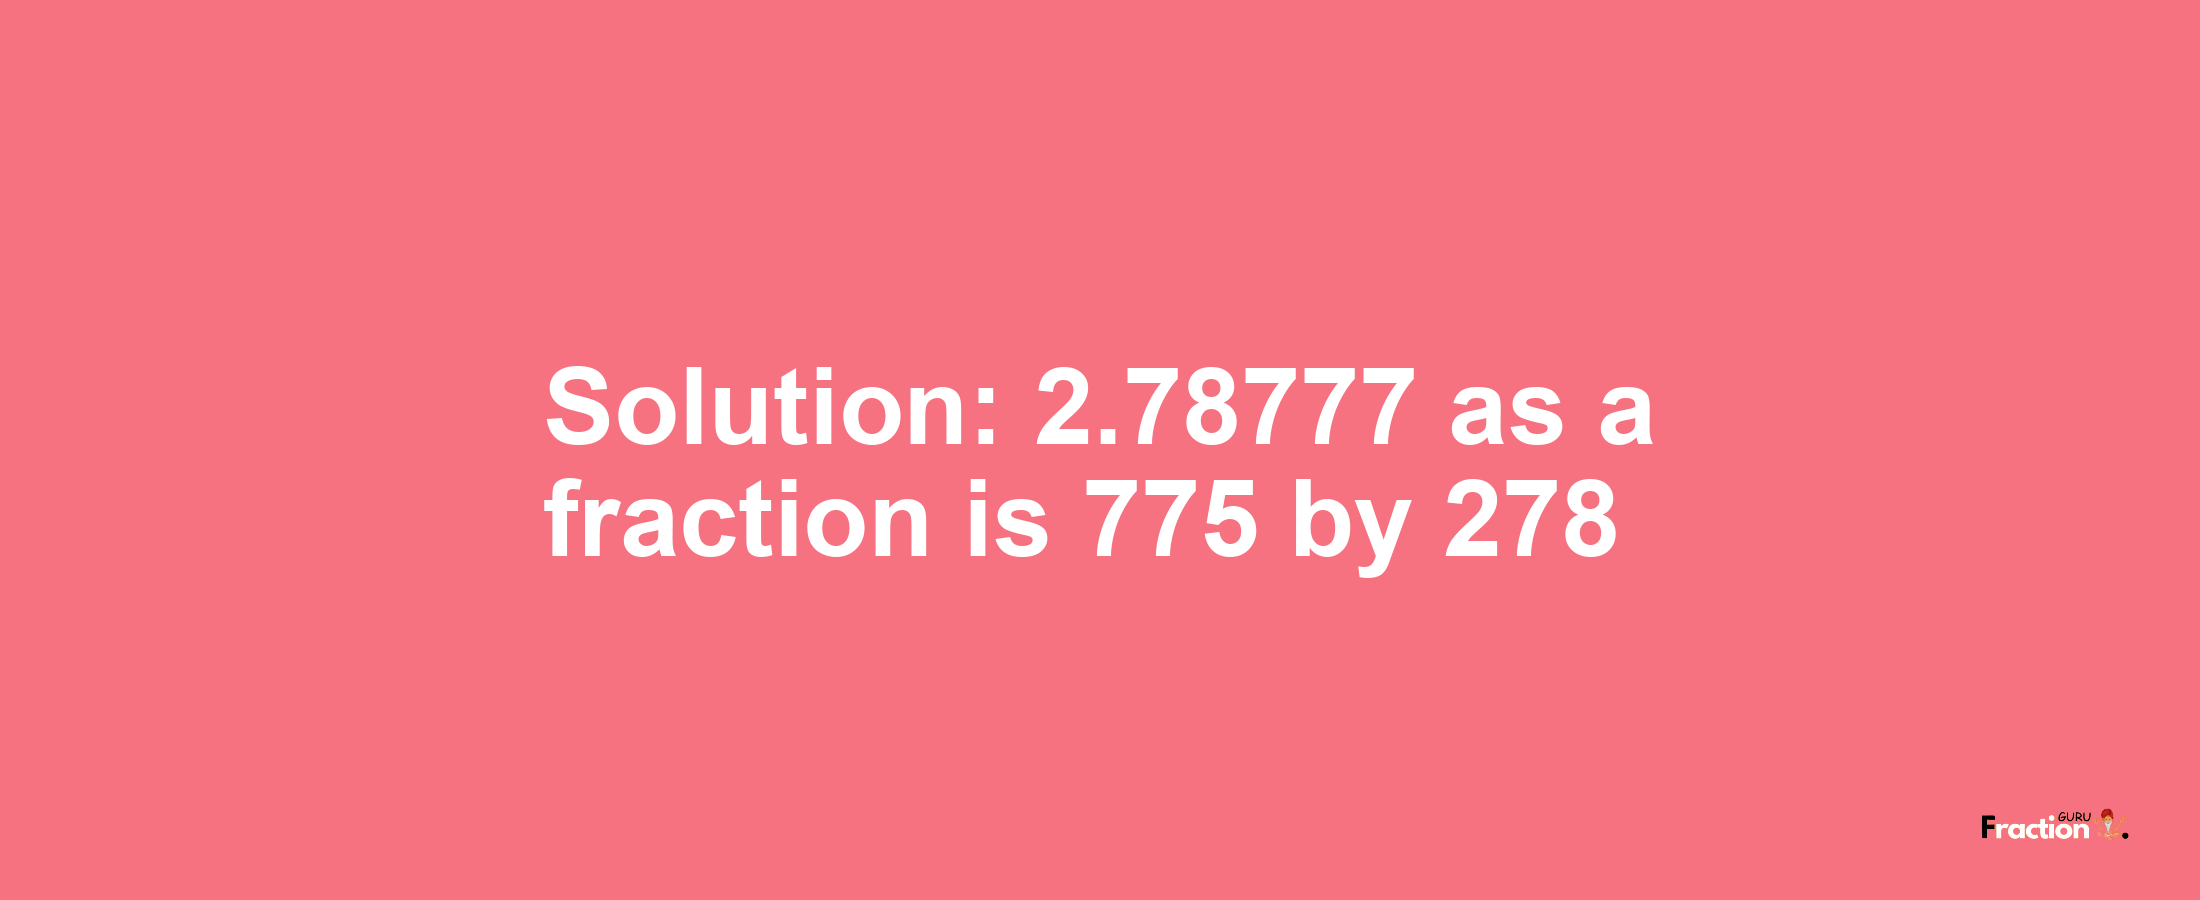 Solution:2.78777 as a fraction is 775/278